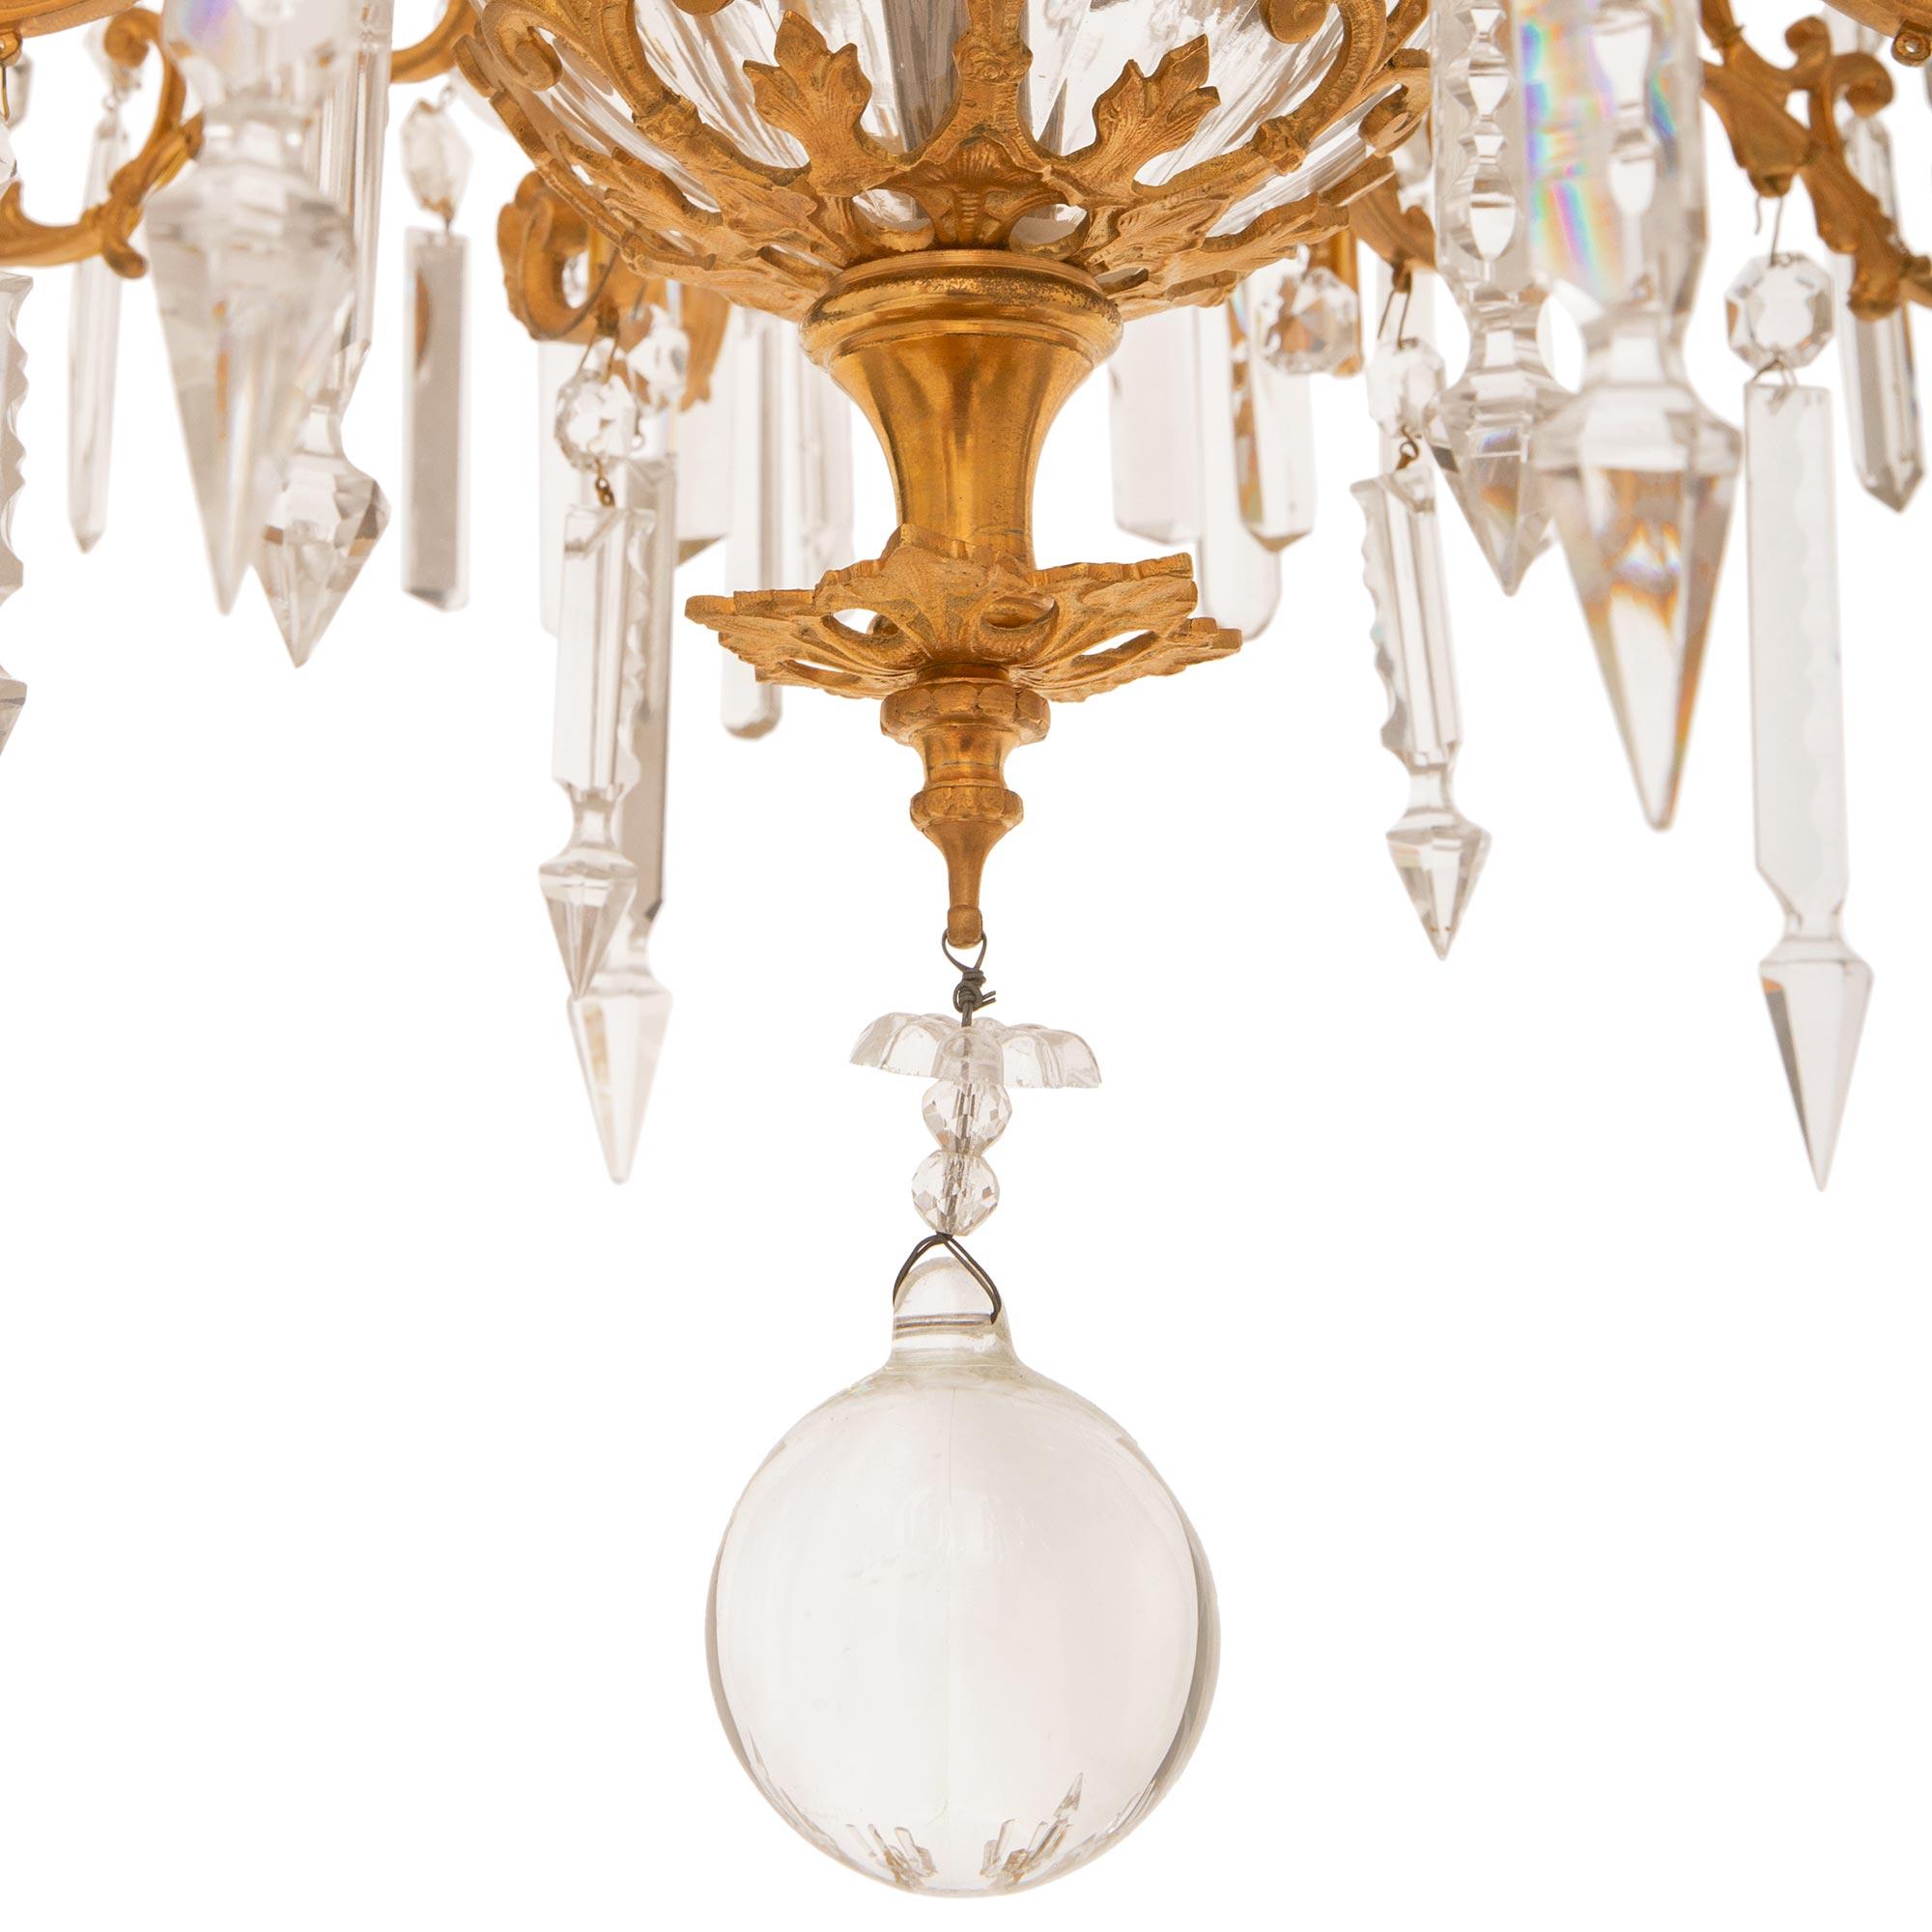 French 19th Century Louis XVI Style Baccarat Crystal and Ormolu Chandelier For Sale 6